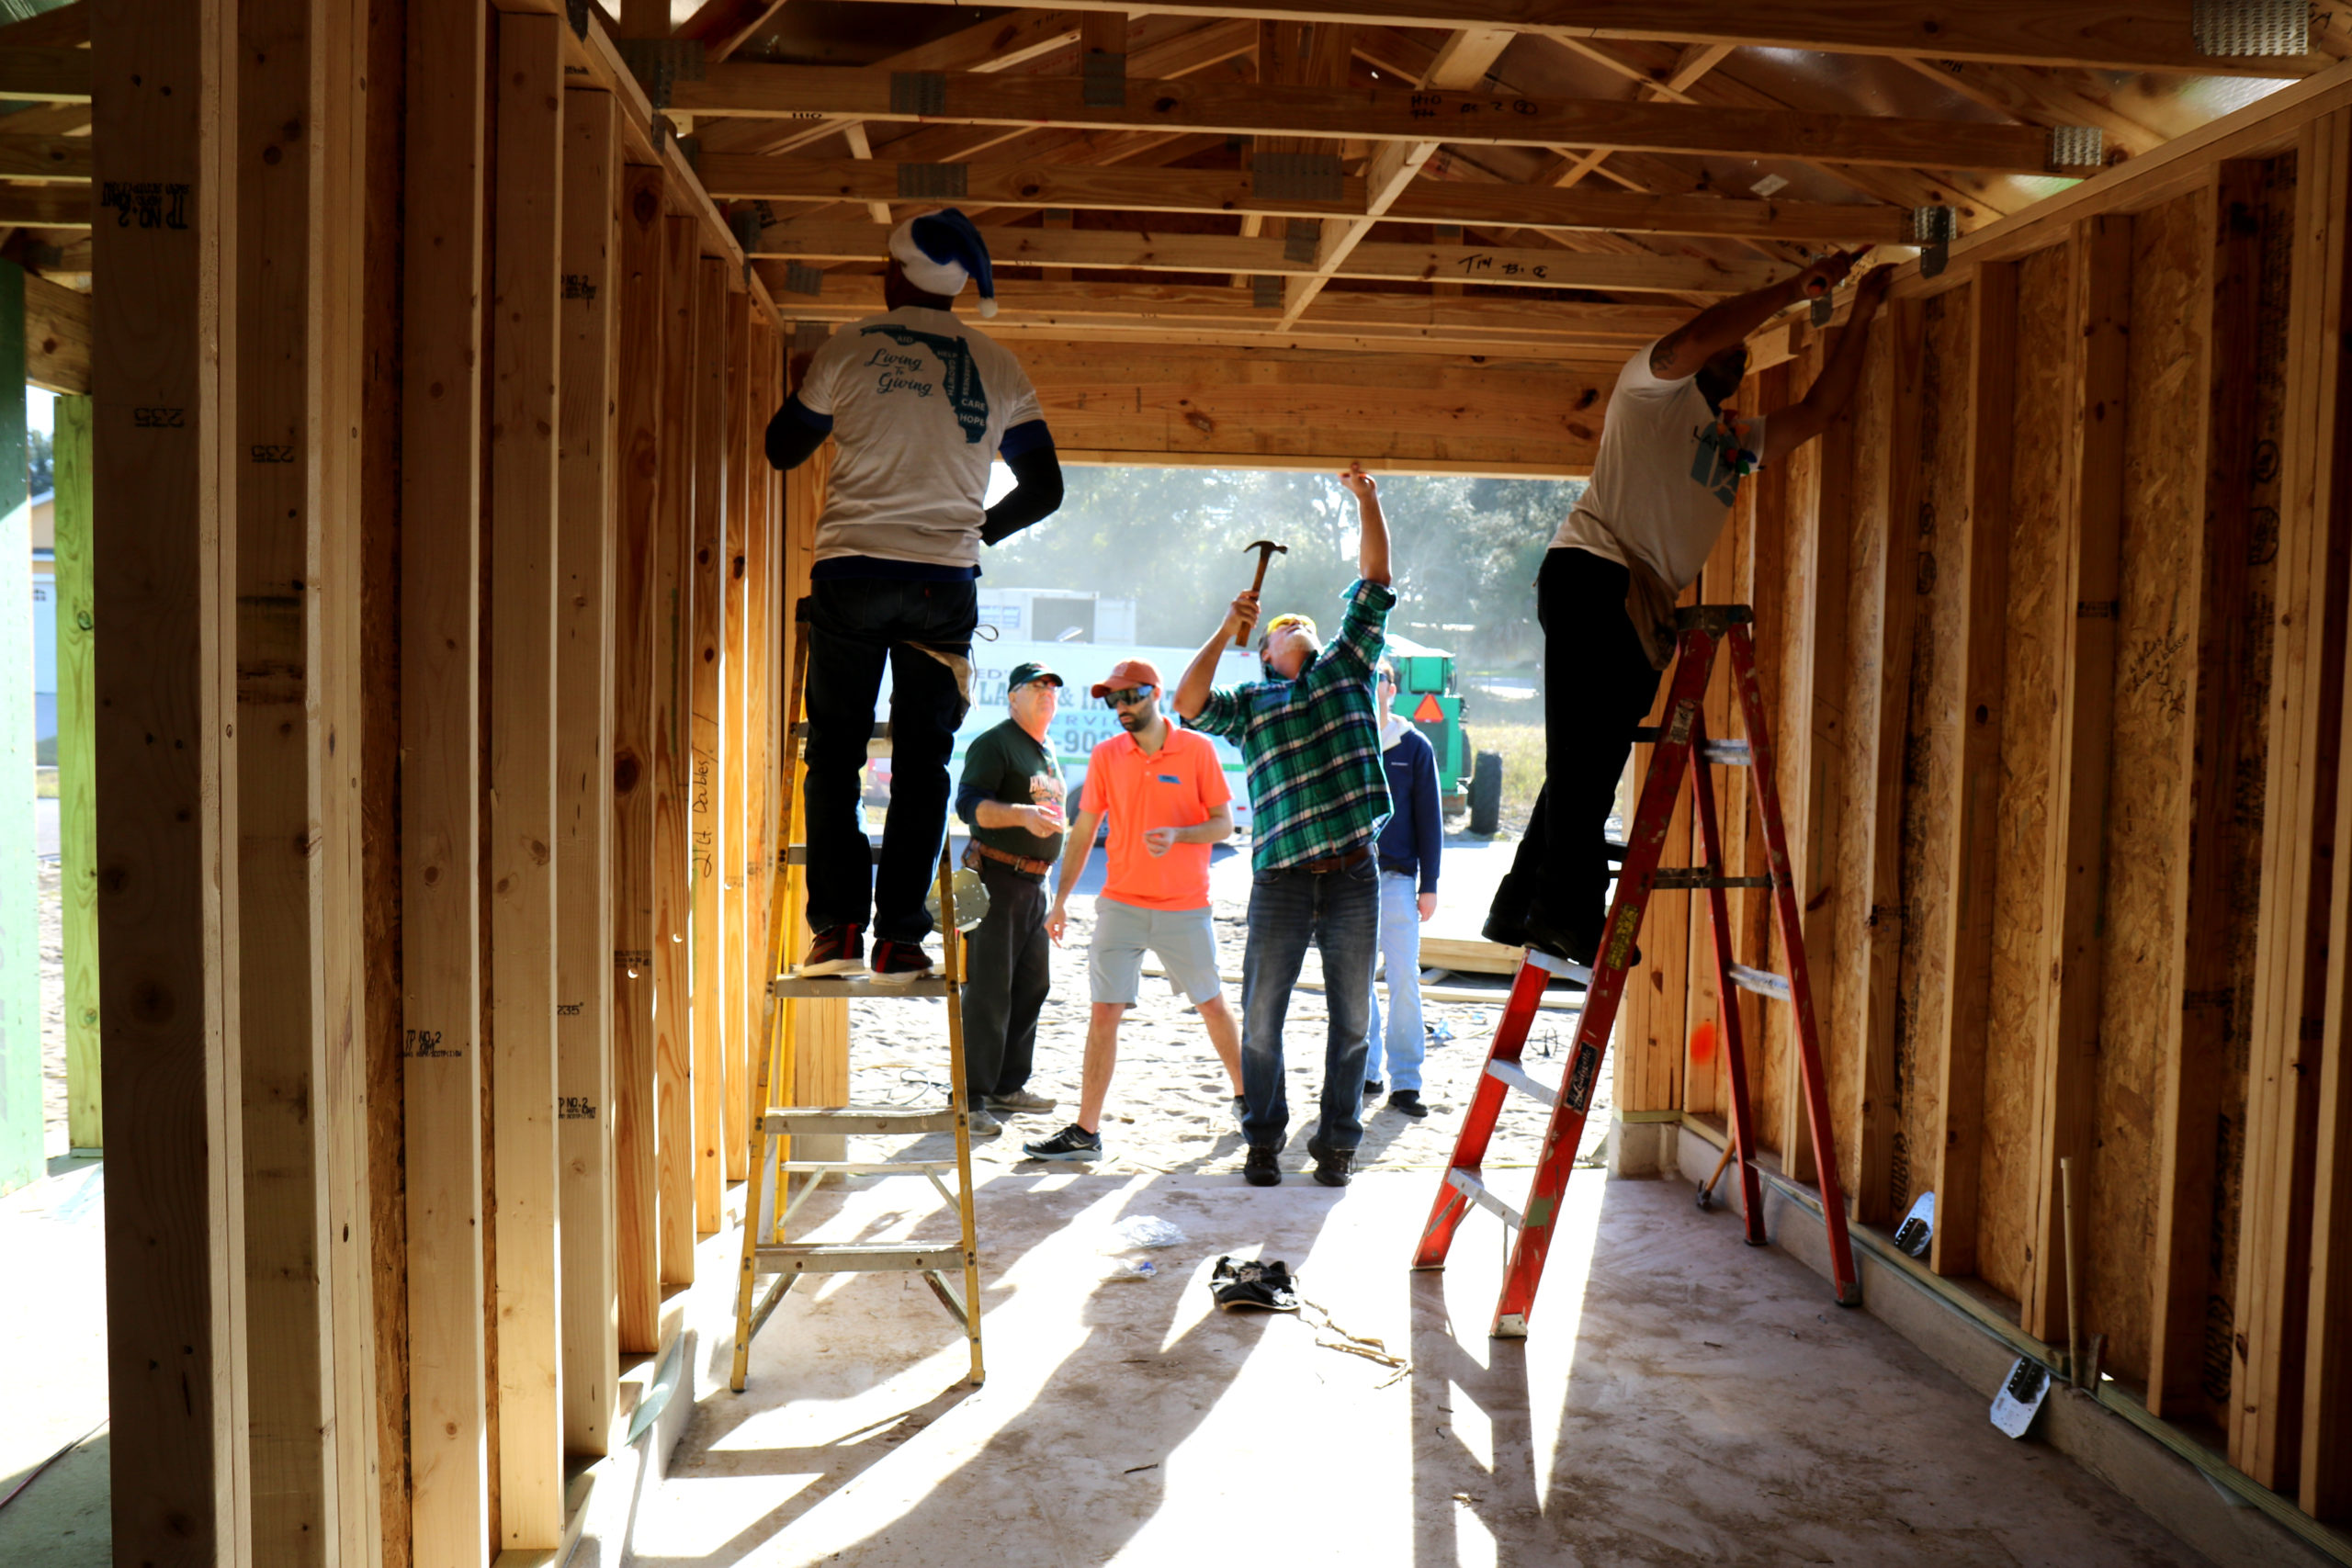 Group of volunteers standing on ladders and reaching up to complete various tasks with tools in in-progress house